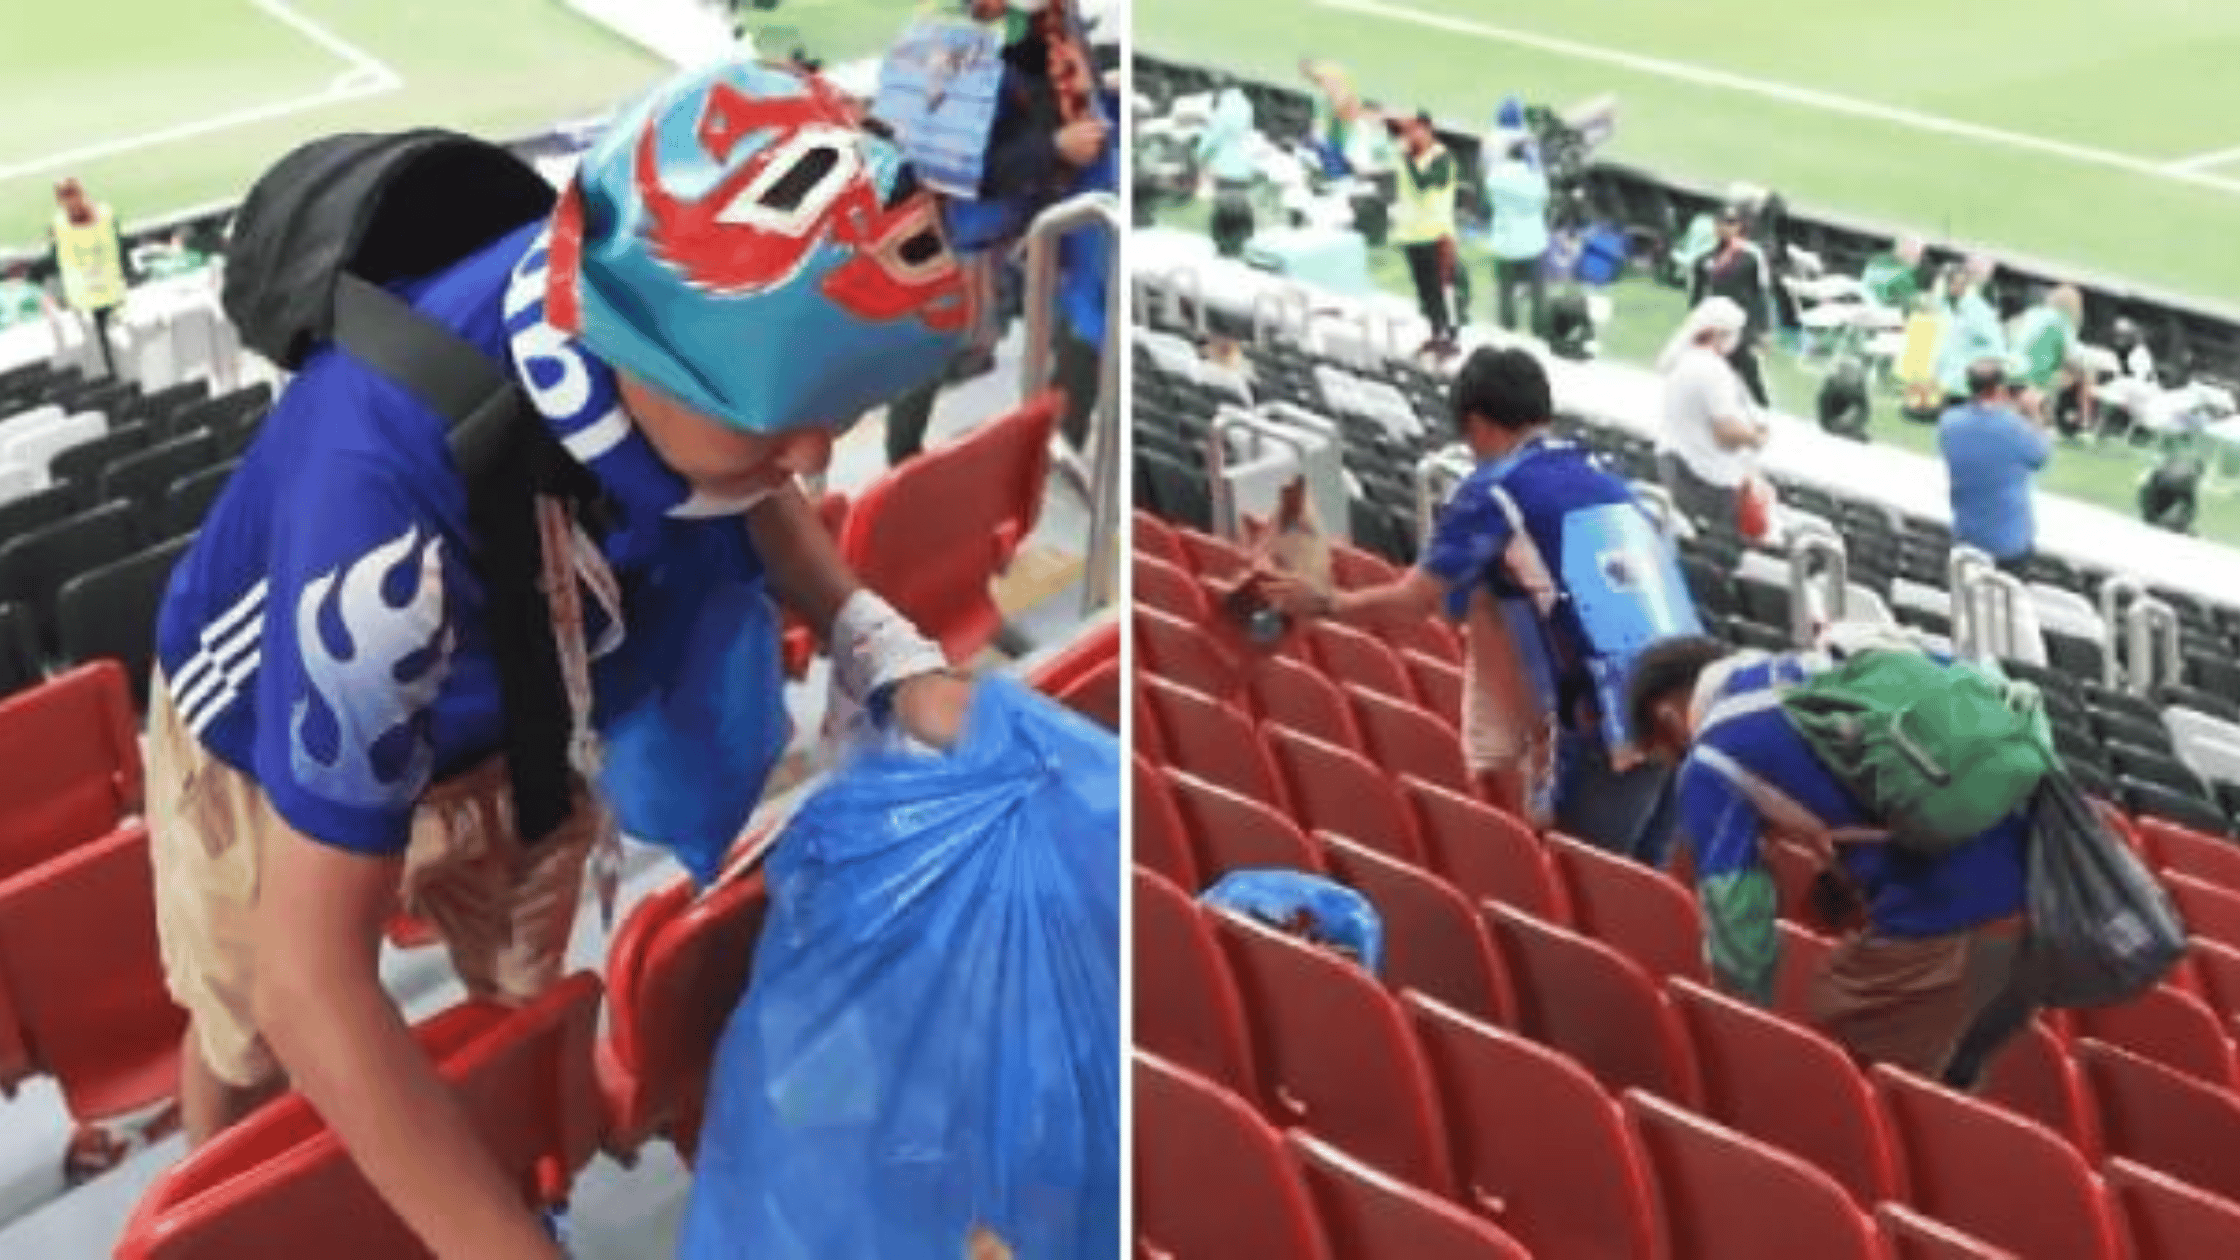 Japanese fans cleaning the stadium after defeating Germany